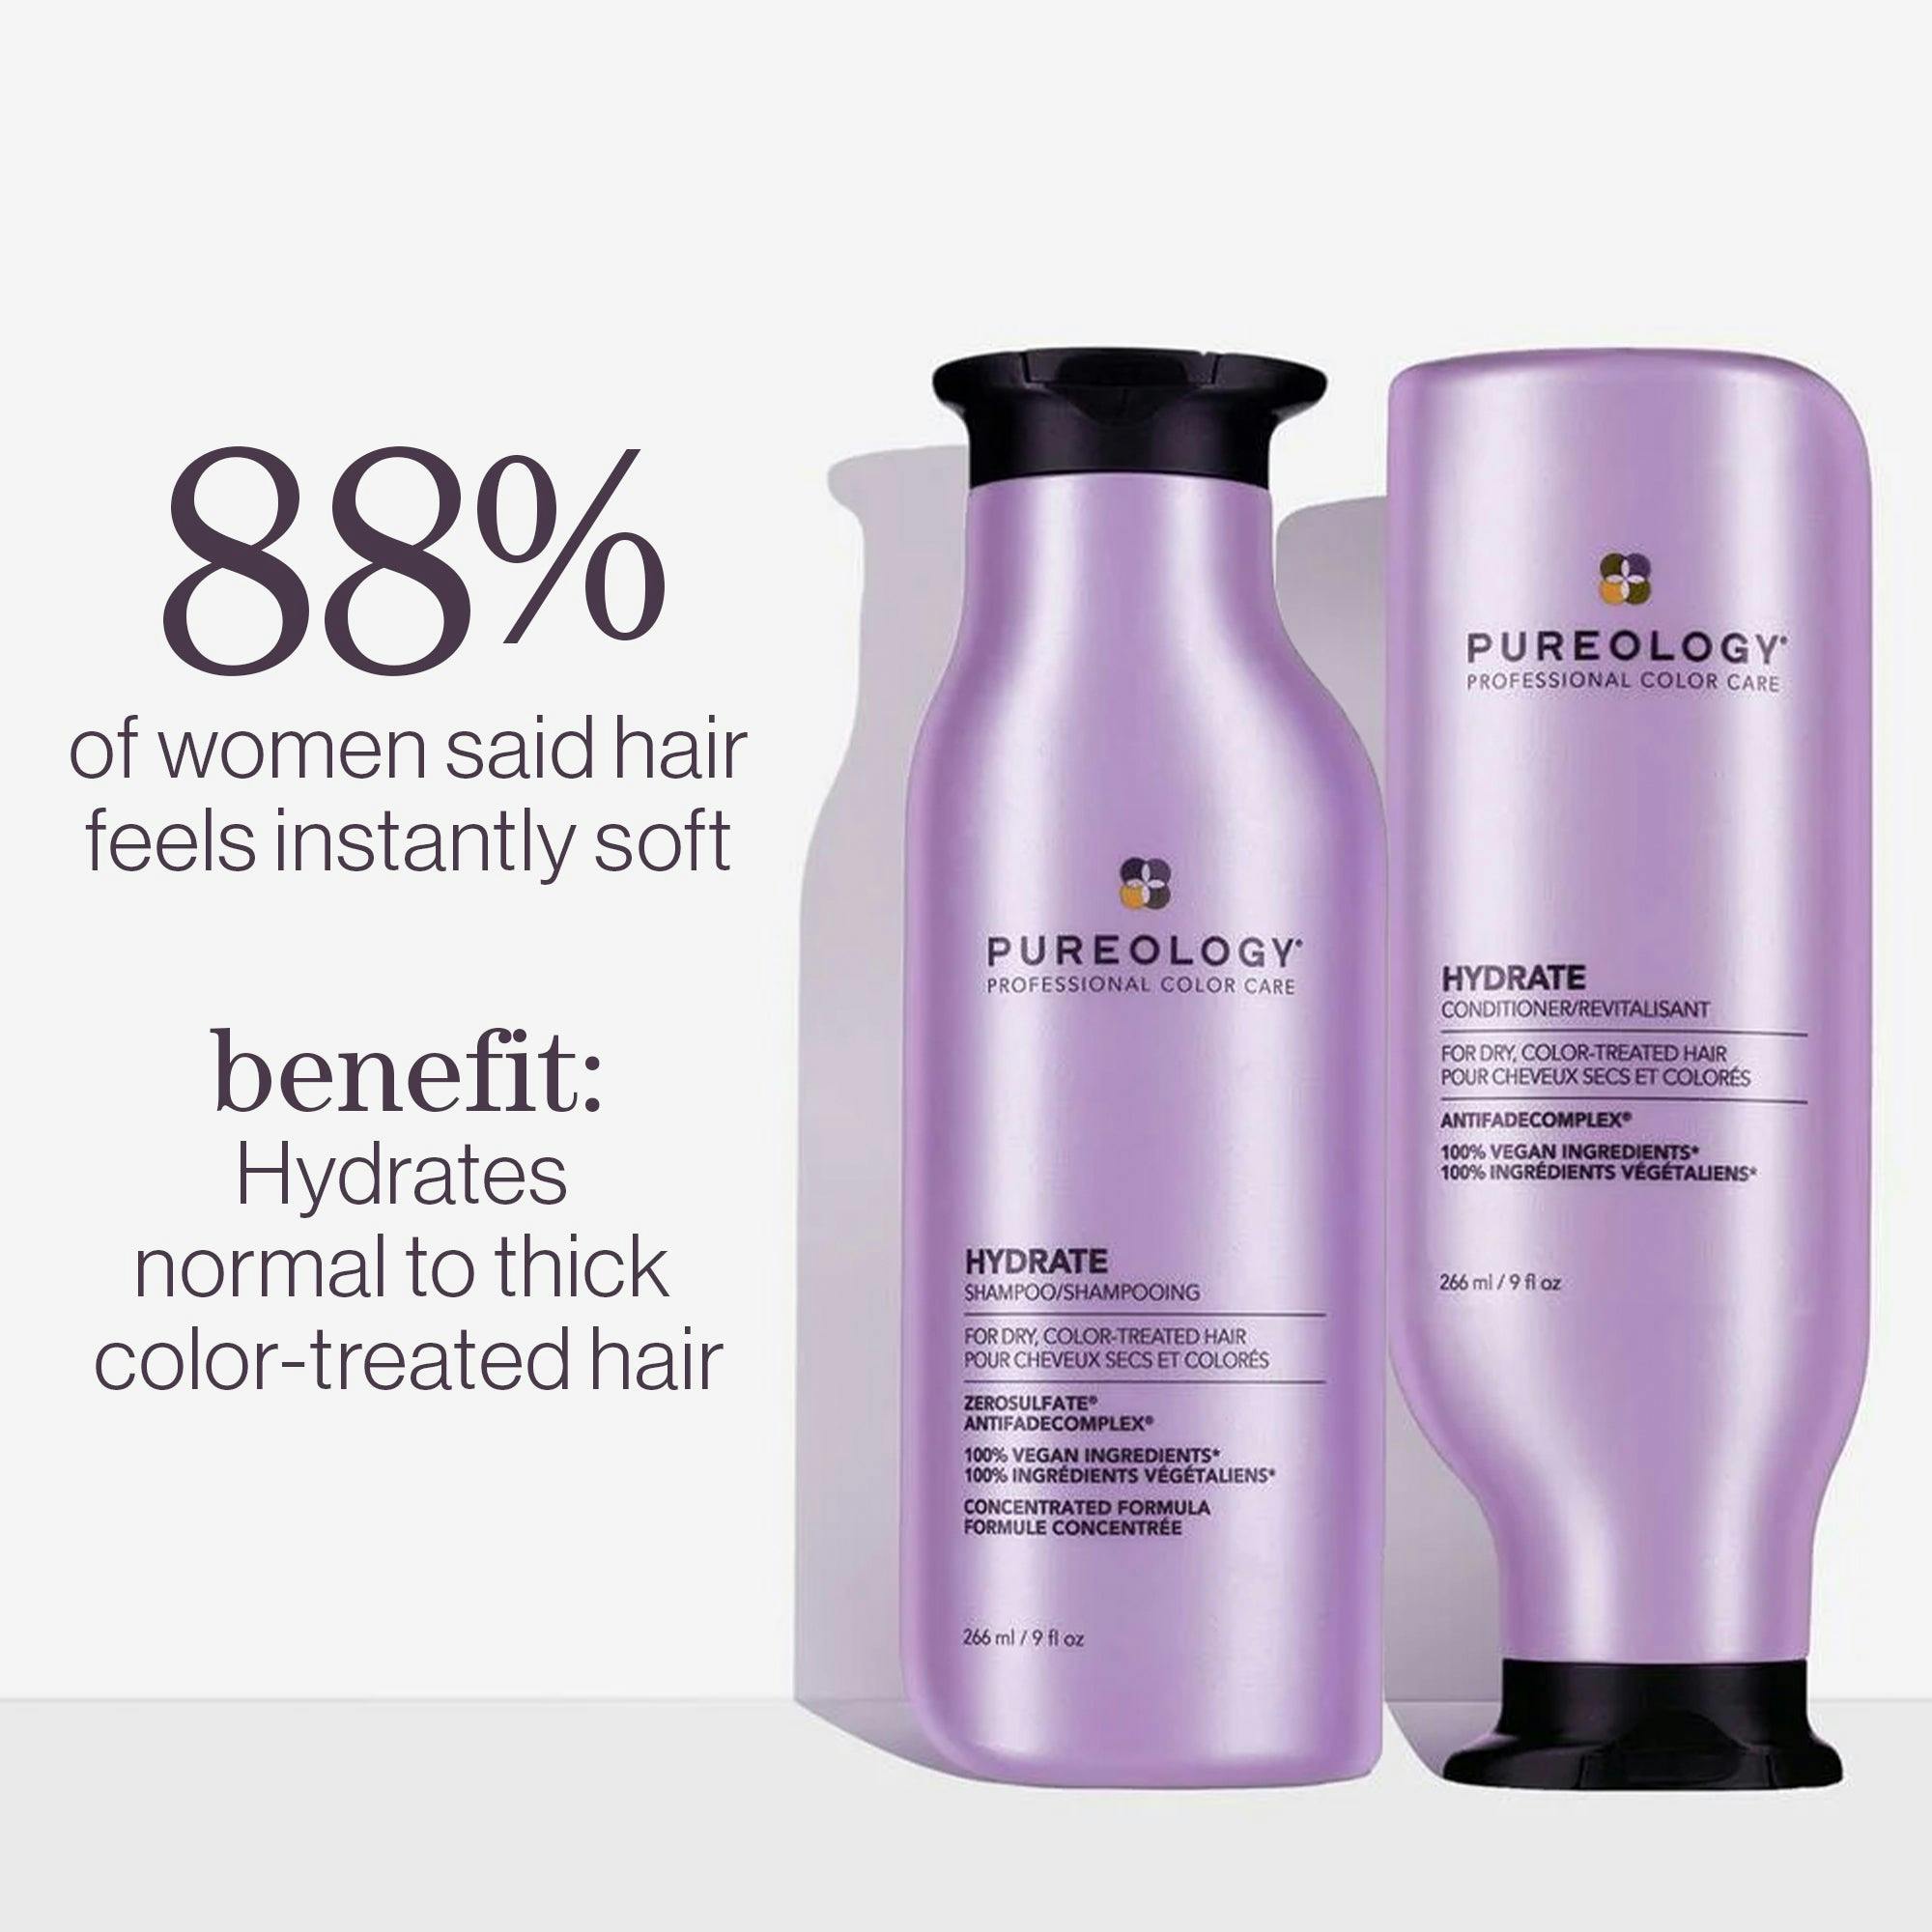 Pureology A Touch of Light Hydration Bundle